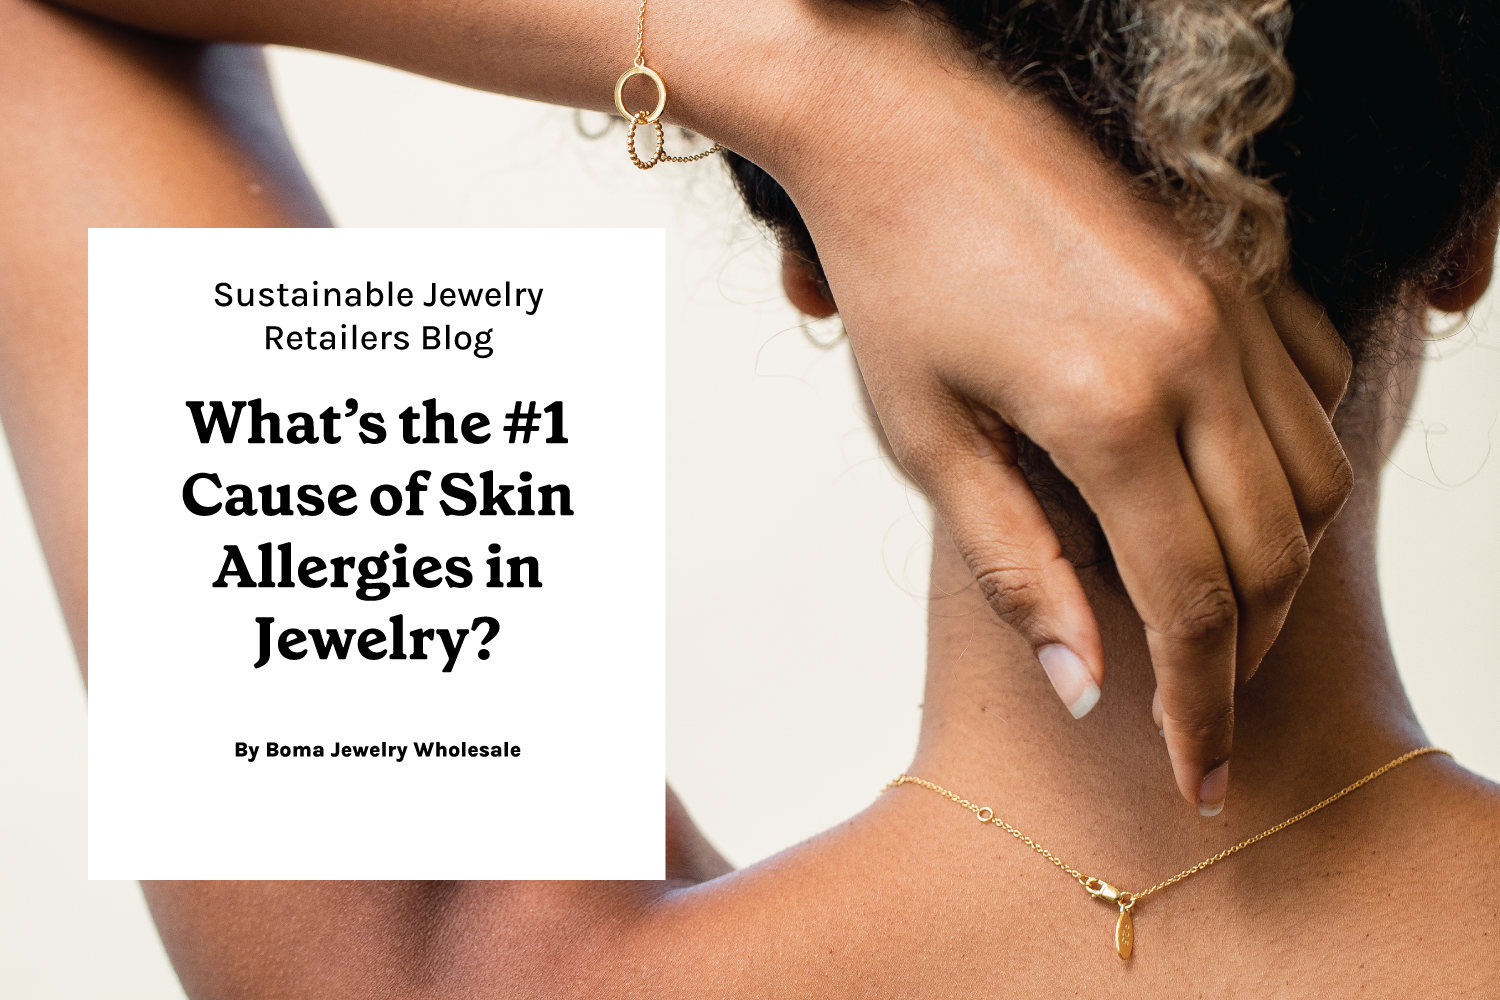 Boma Jewelry Wholesale Blog Cause for Skin Irritations in Jewelry